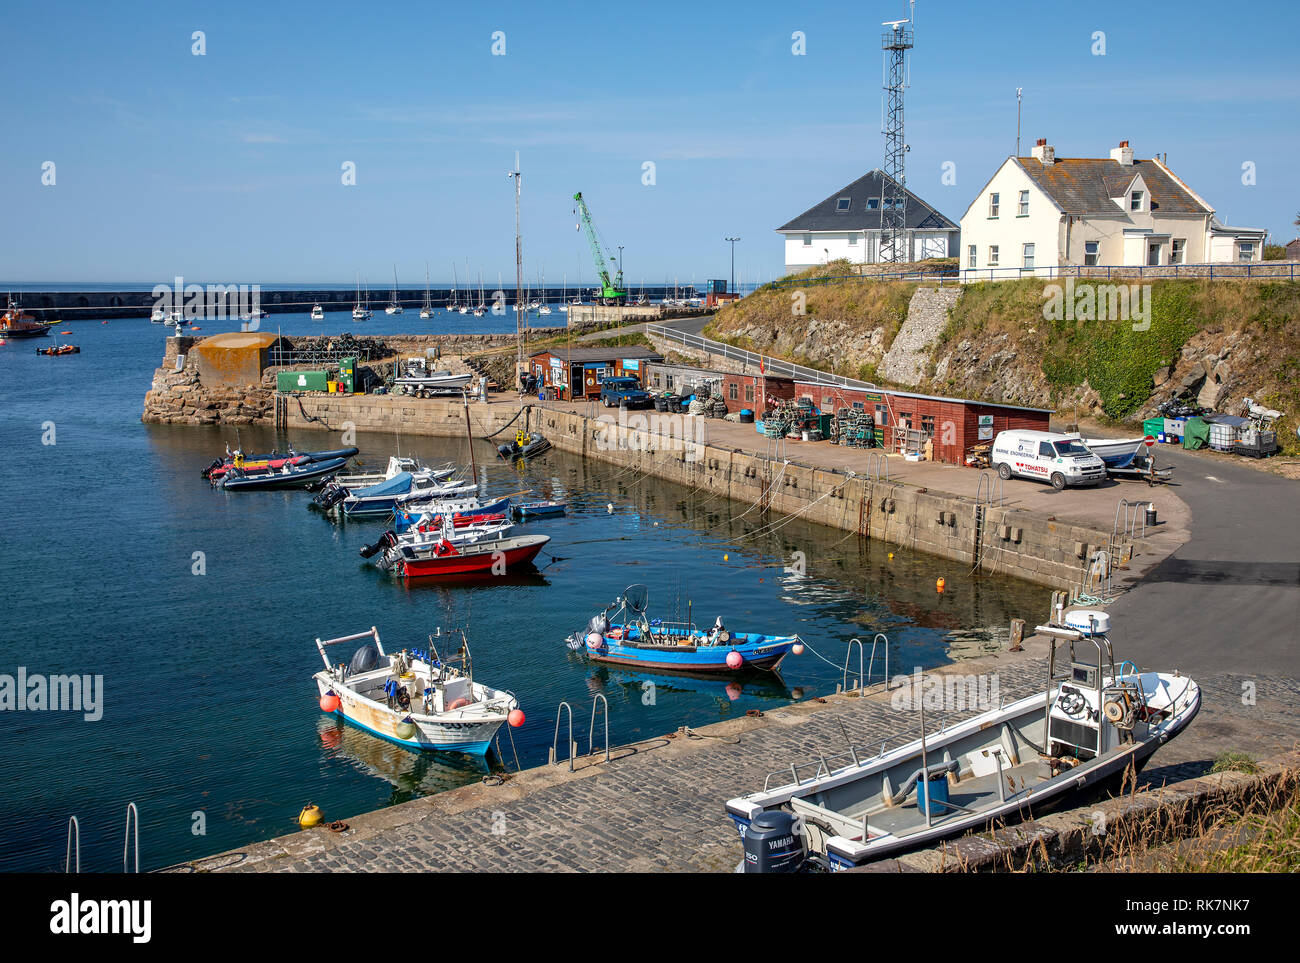 A sunny day view of Braye Harbour on Alderney Channel Islands. Stock Photo